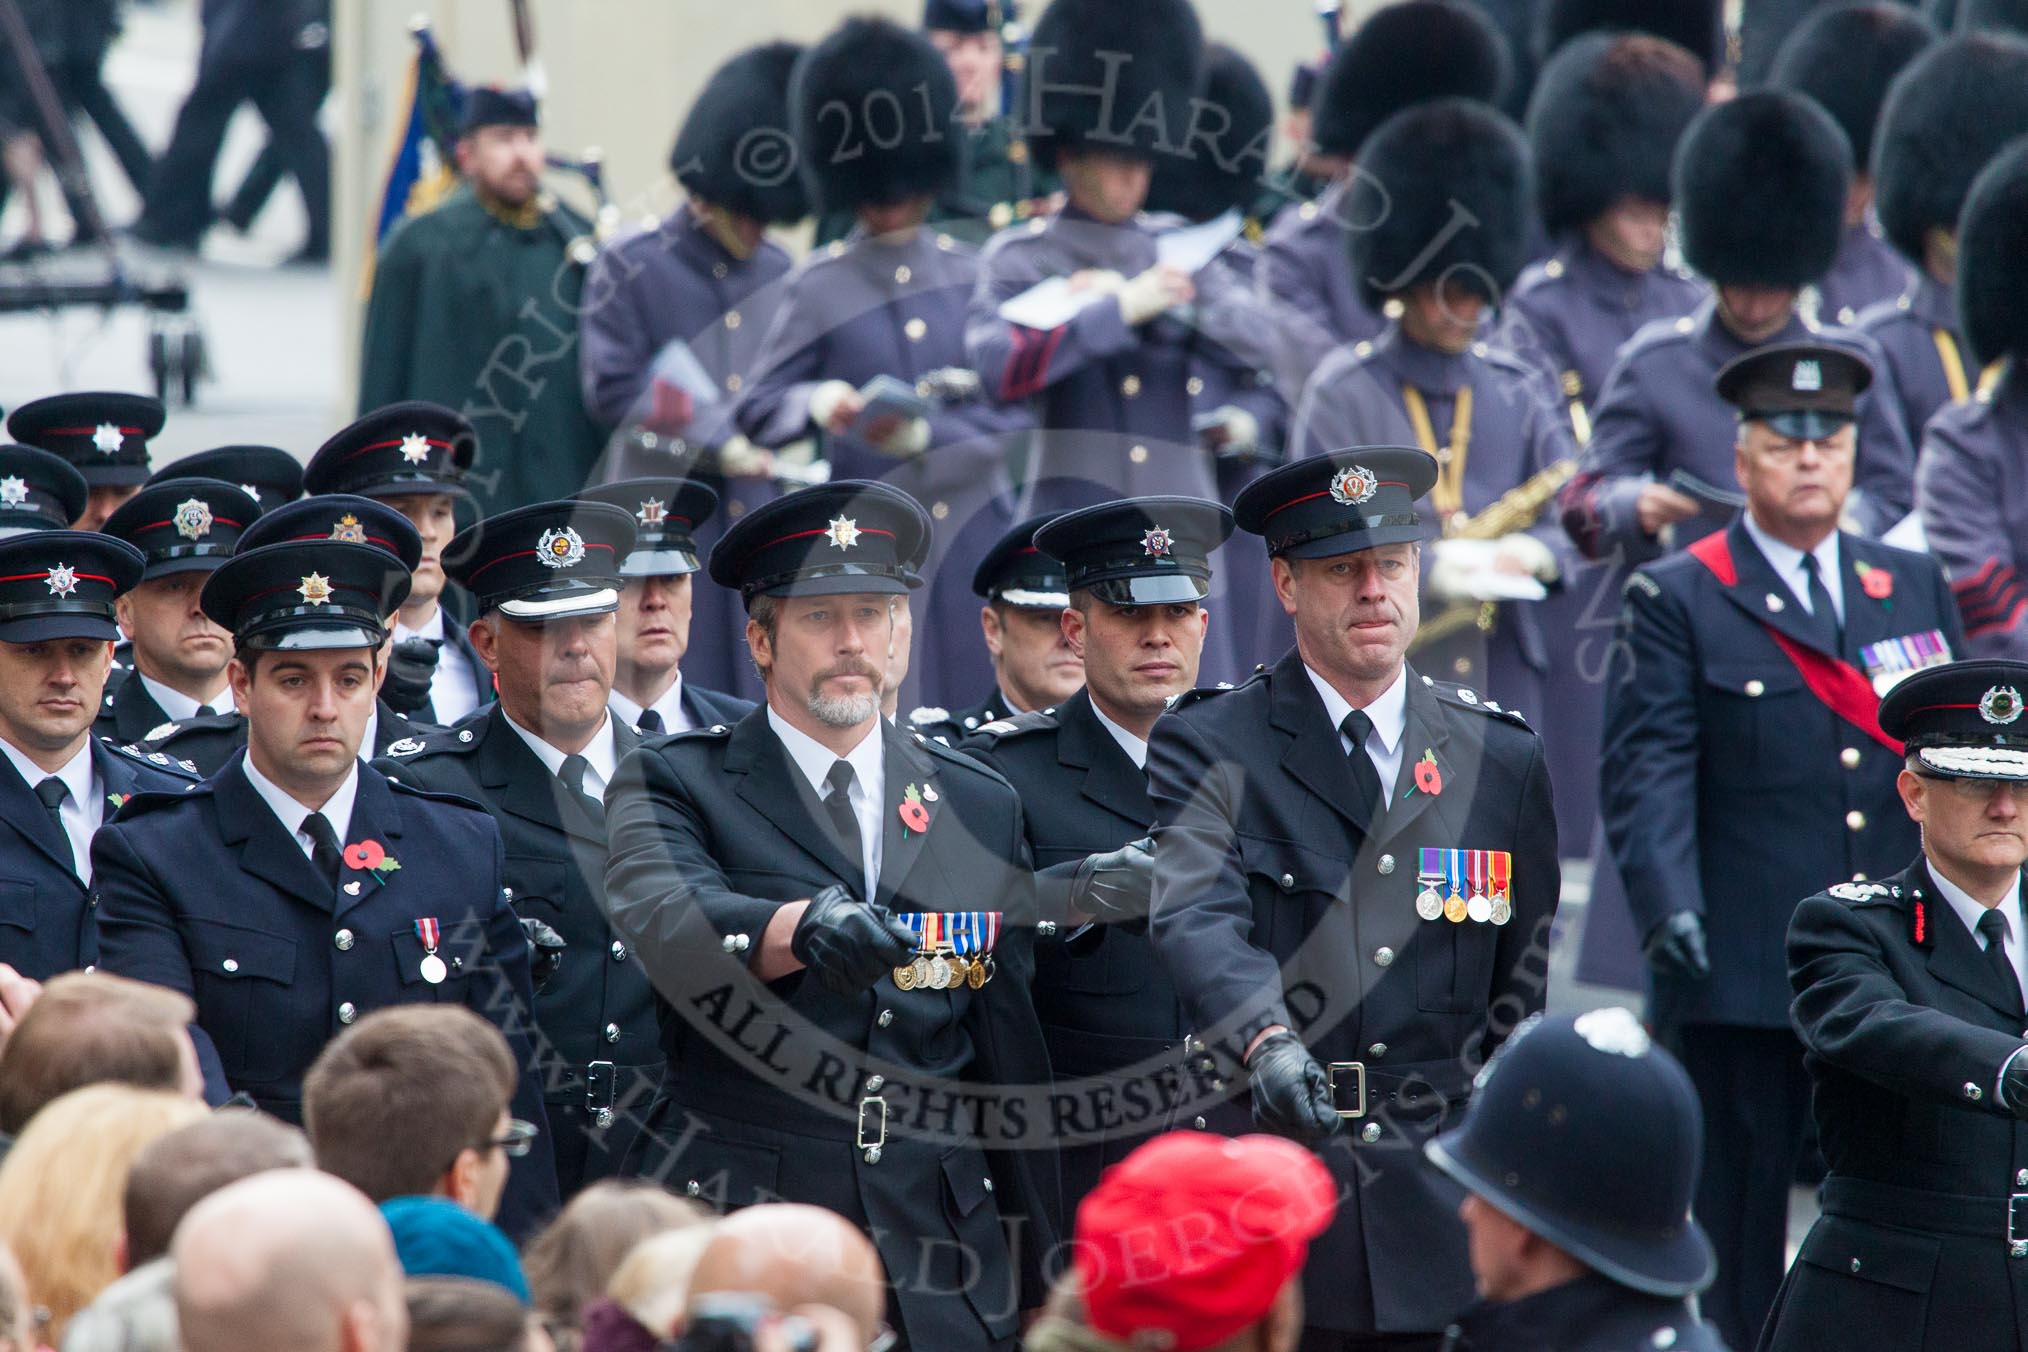 Remembrance Sunday at the Cenotaph in London 2014: A detachment of the Civil Services (Fire Brigade?) arriving at Whitehall.
Press stand opposite the Foreign Office building, Whitehall, London SW1,
London,
Greater London,
United Kingdom,
on 09 November 2014 at 10:31, image #74